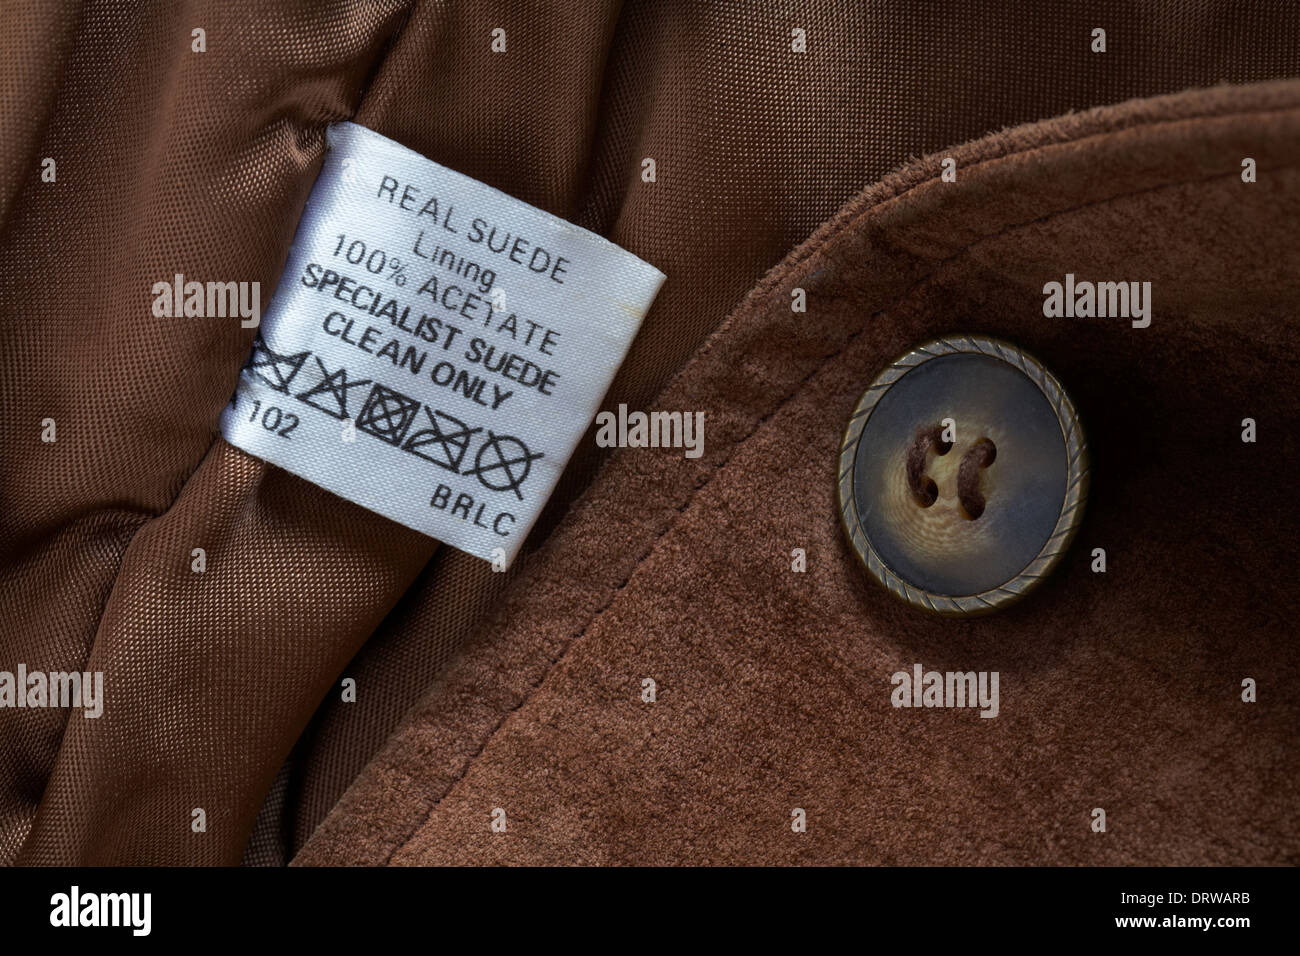 Real Suede label in jacket - care washing symbols and instructions Stock  Photo - Alamy